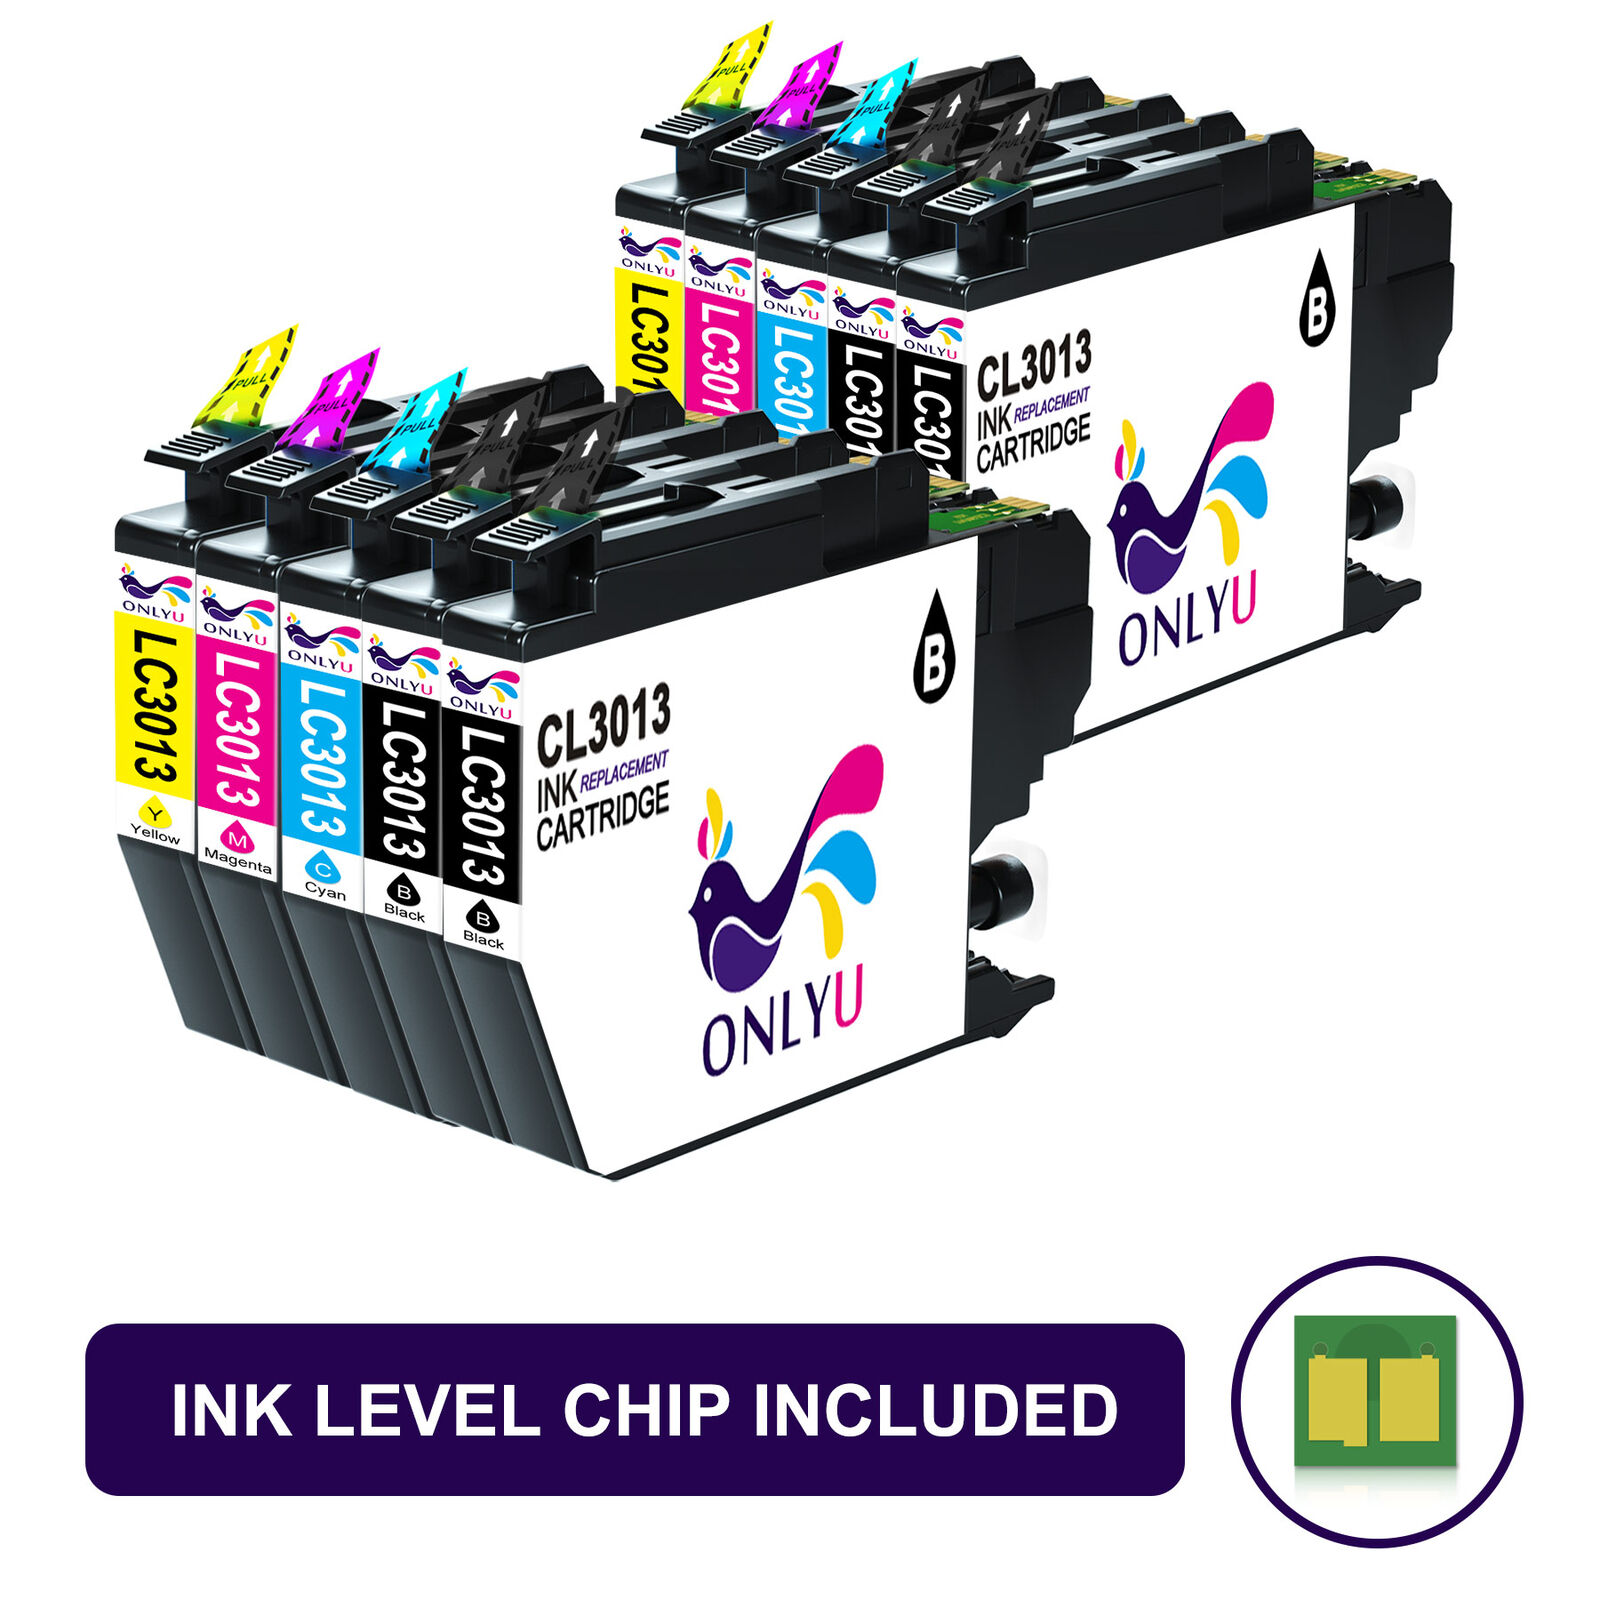 10x Ink Cartridge for Brother LC3013 LC3011 MFC-J690DW J491DW MFC-J895DW Printer